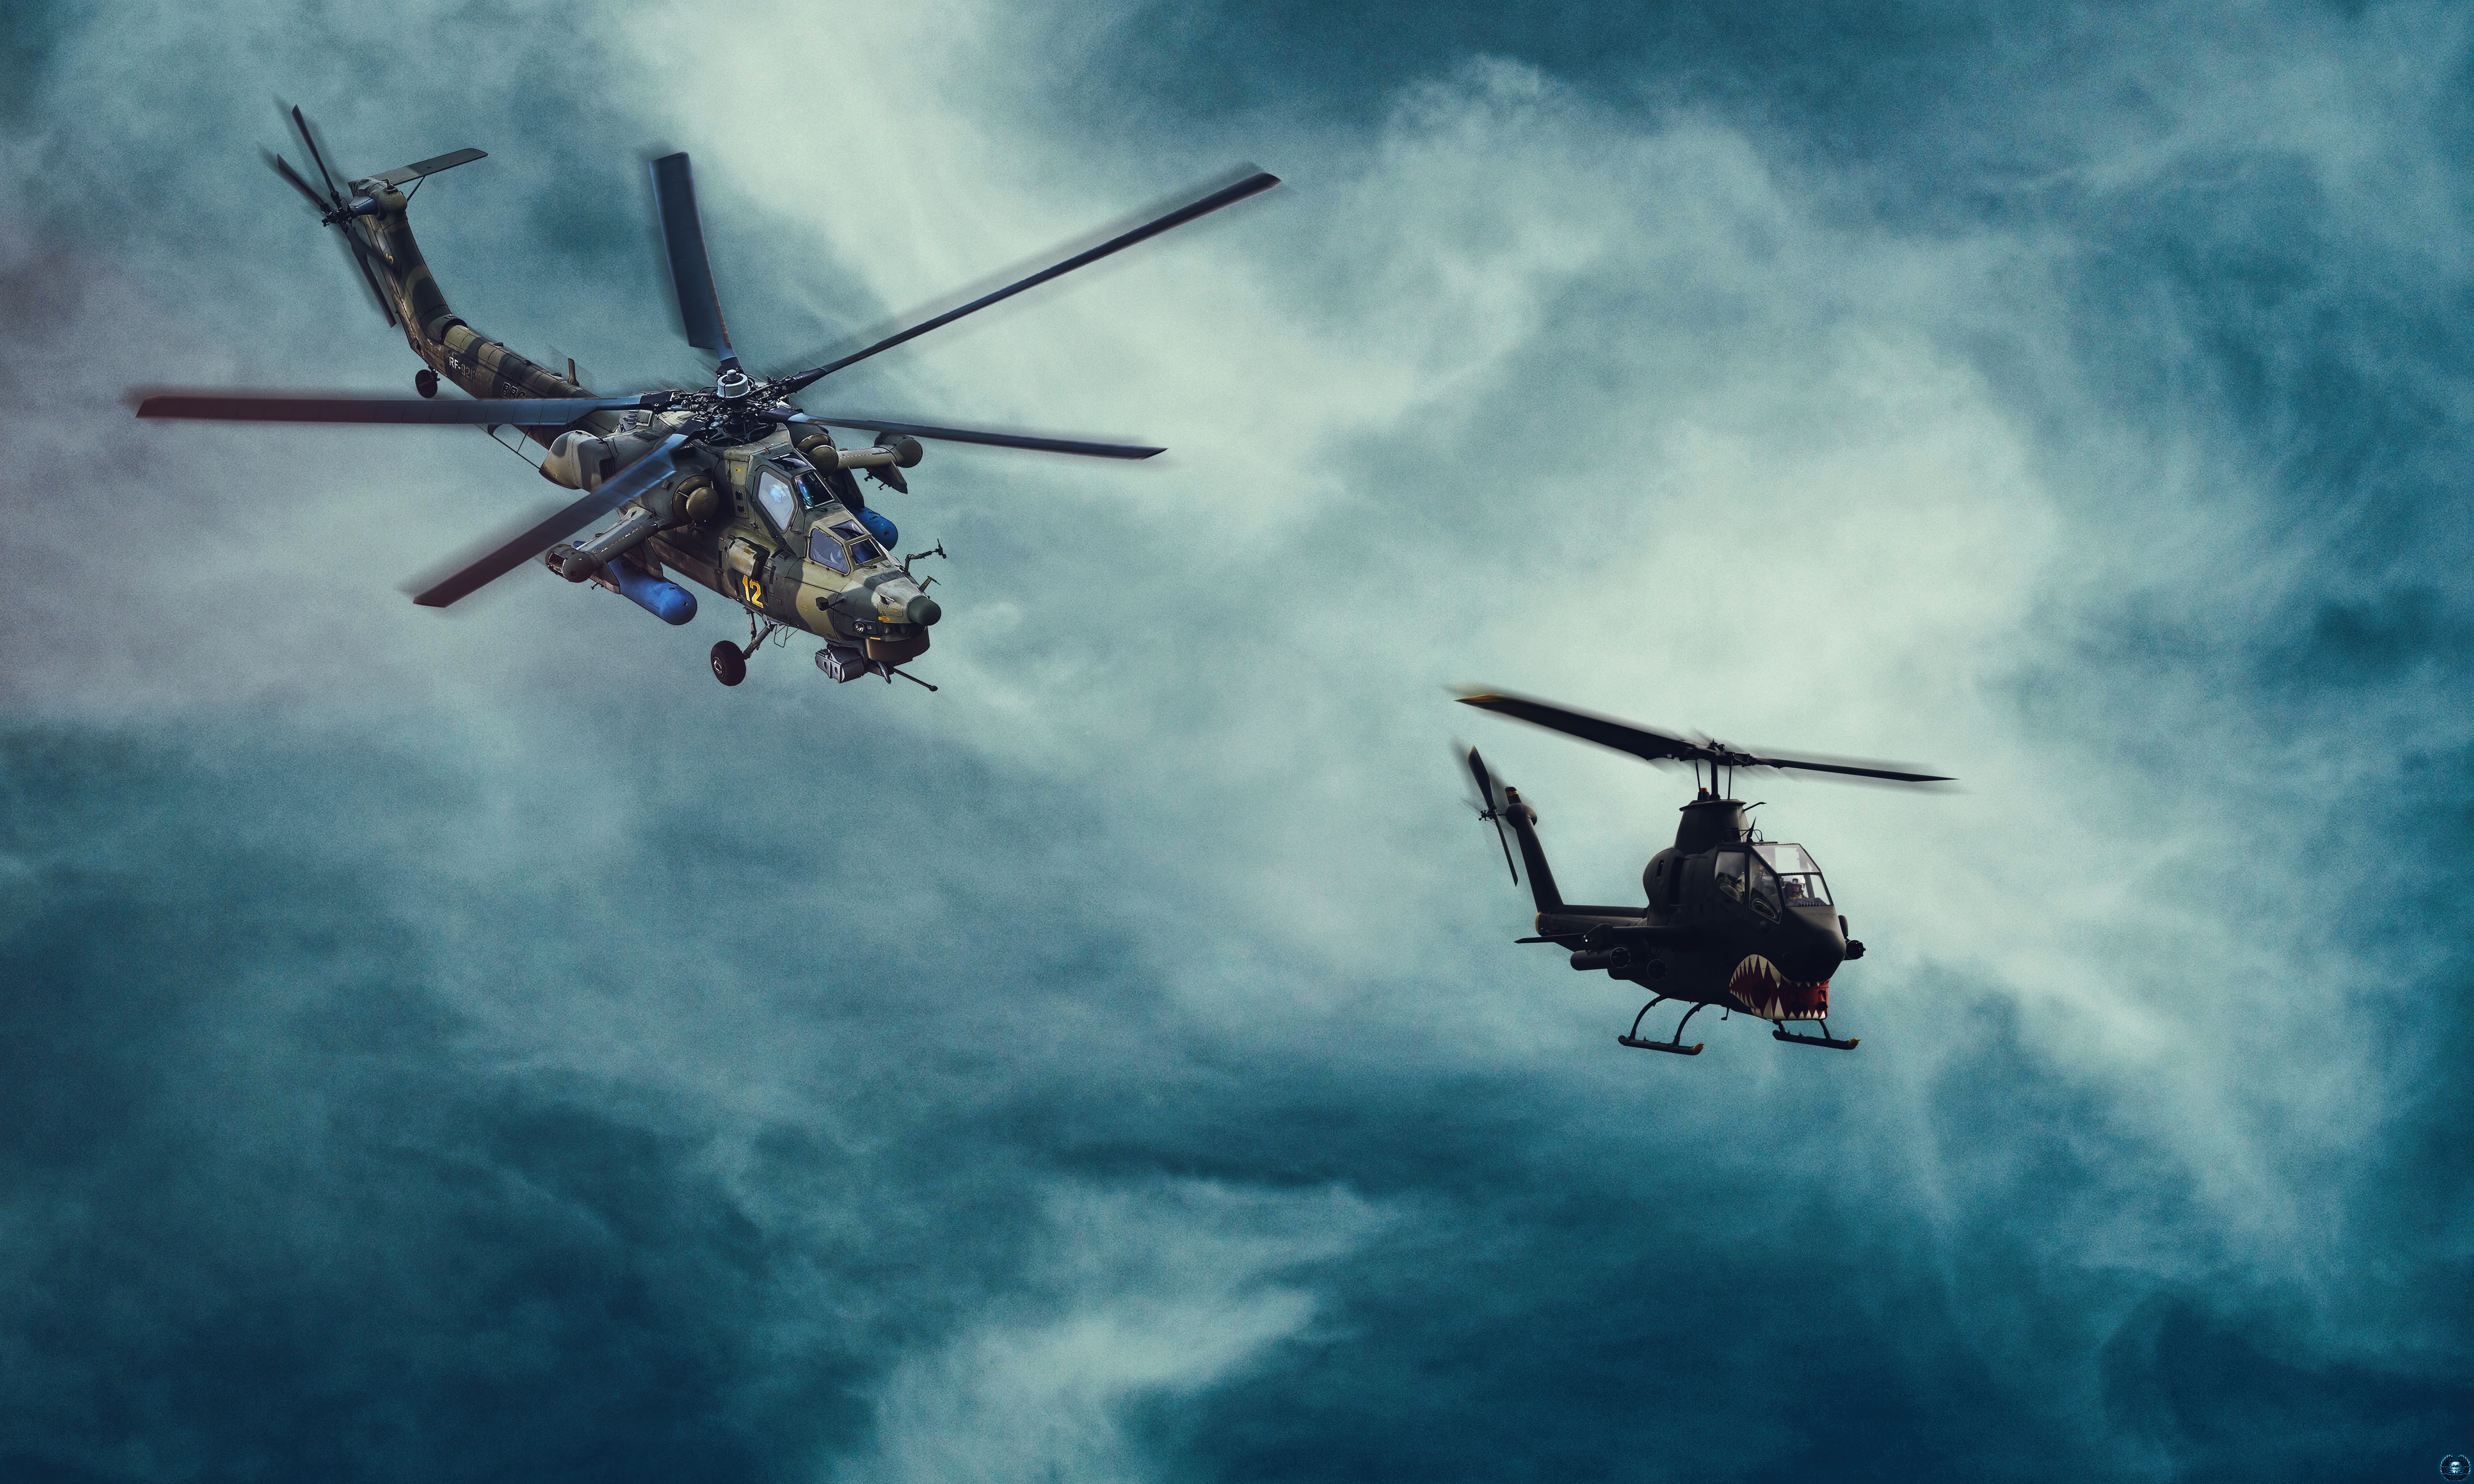 Helicopter, Cobra, USA, Russia, Photoshop, AH-1, Bell AH-1